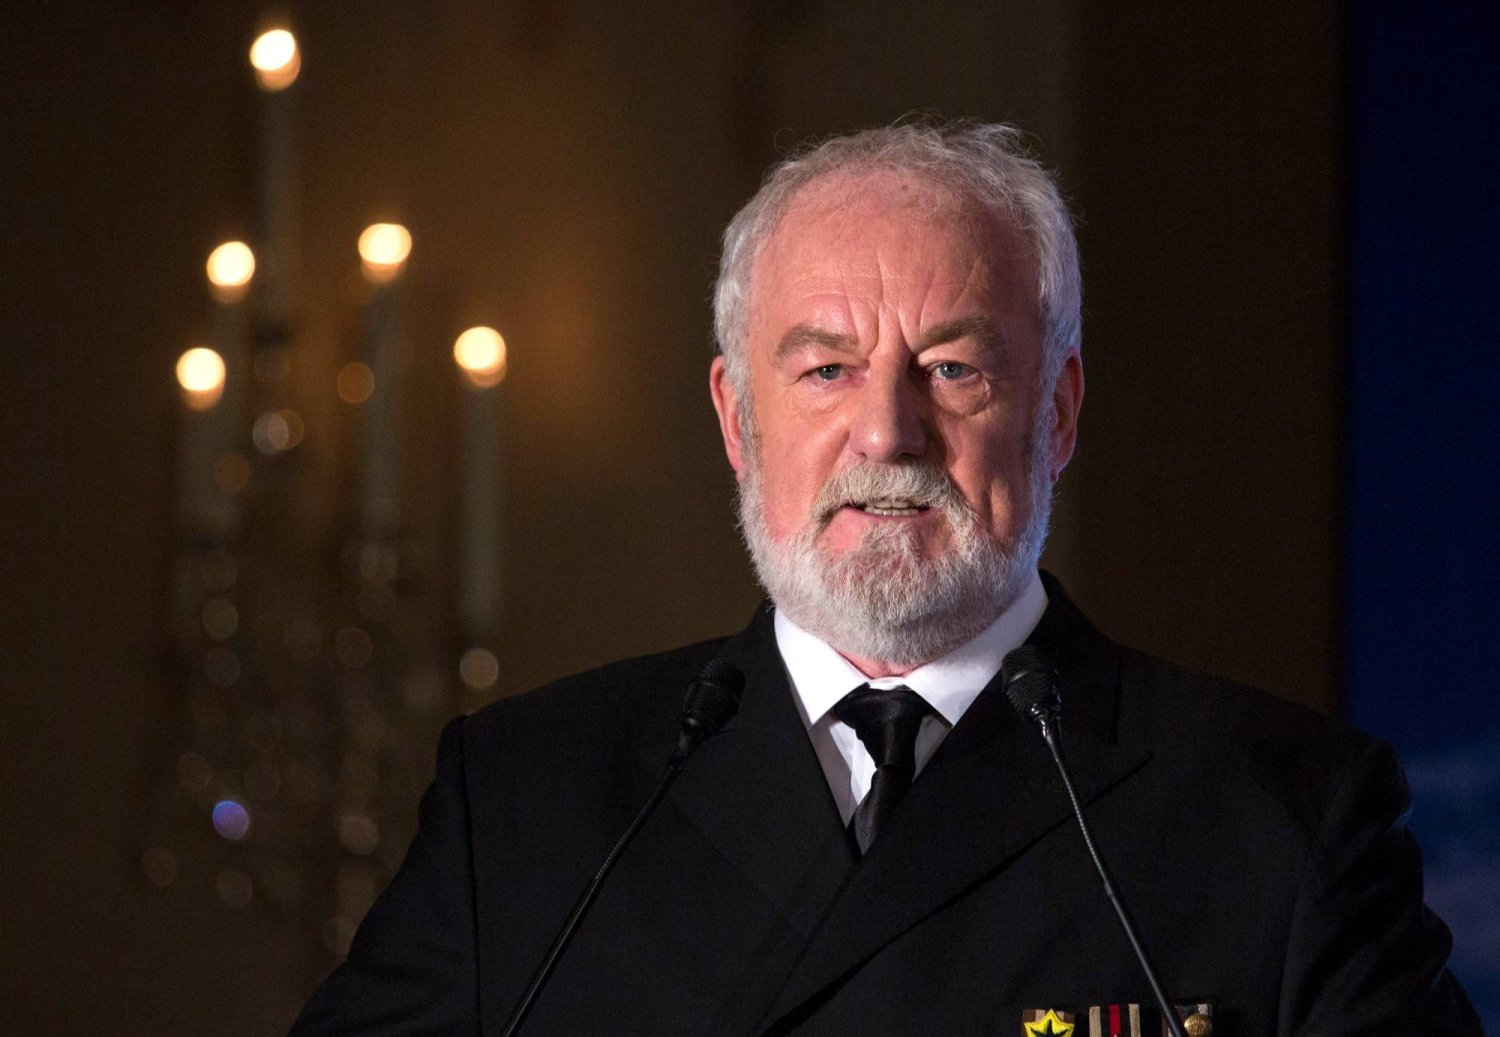 FILE PHOTO: Bernard Hill, actor of captain Edward Smith in the 1997 Titanic movie, speaks during a news conference in Hong Kong January 12, 2014. REUTERS/Tyrone Siu/File Photo